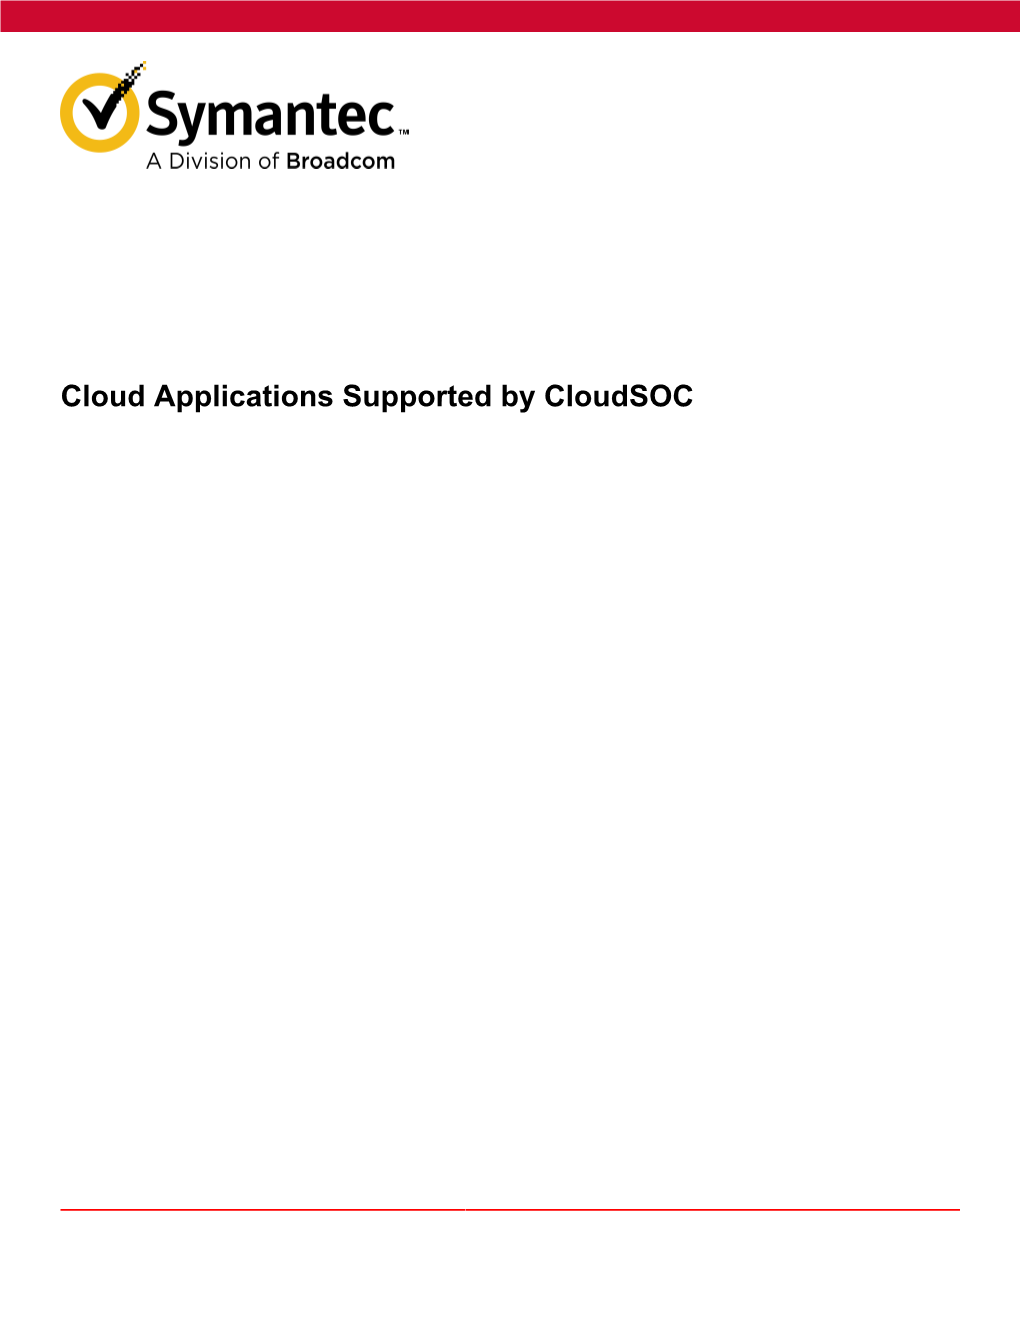 Cloud Applications Supported by Cloudsoc